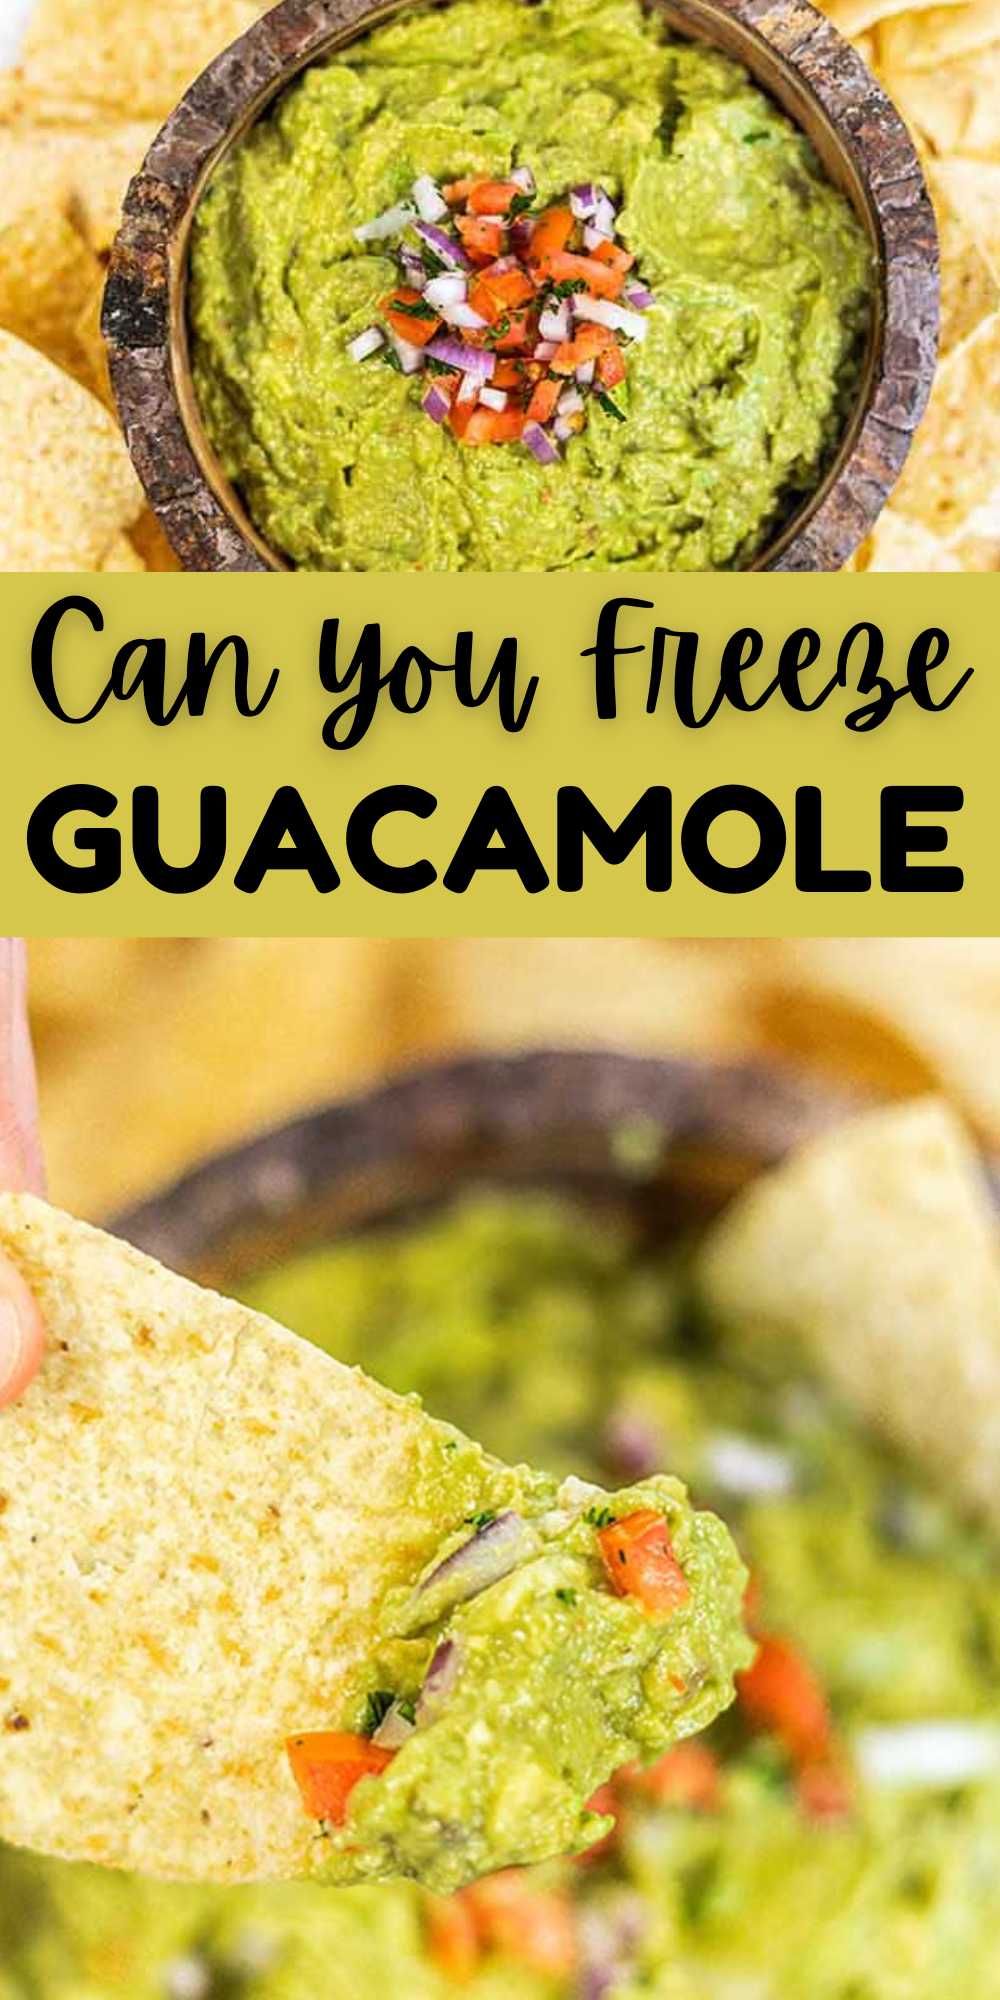 If you have wondered Can you Freeze Guacamole these tips will help. We will show how to properly store and freeze your favorite dip. If you have leftover guacamole and wondered if you can freeze it, then these tips and tricks will help. #eatingonadime #canyoufreezeguacamole #guacamole #freezingguacamole